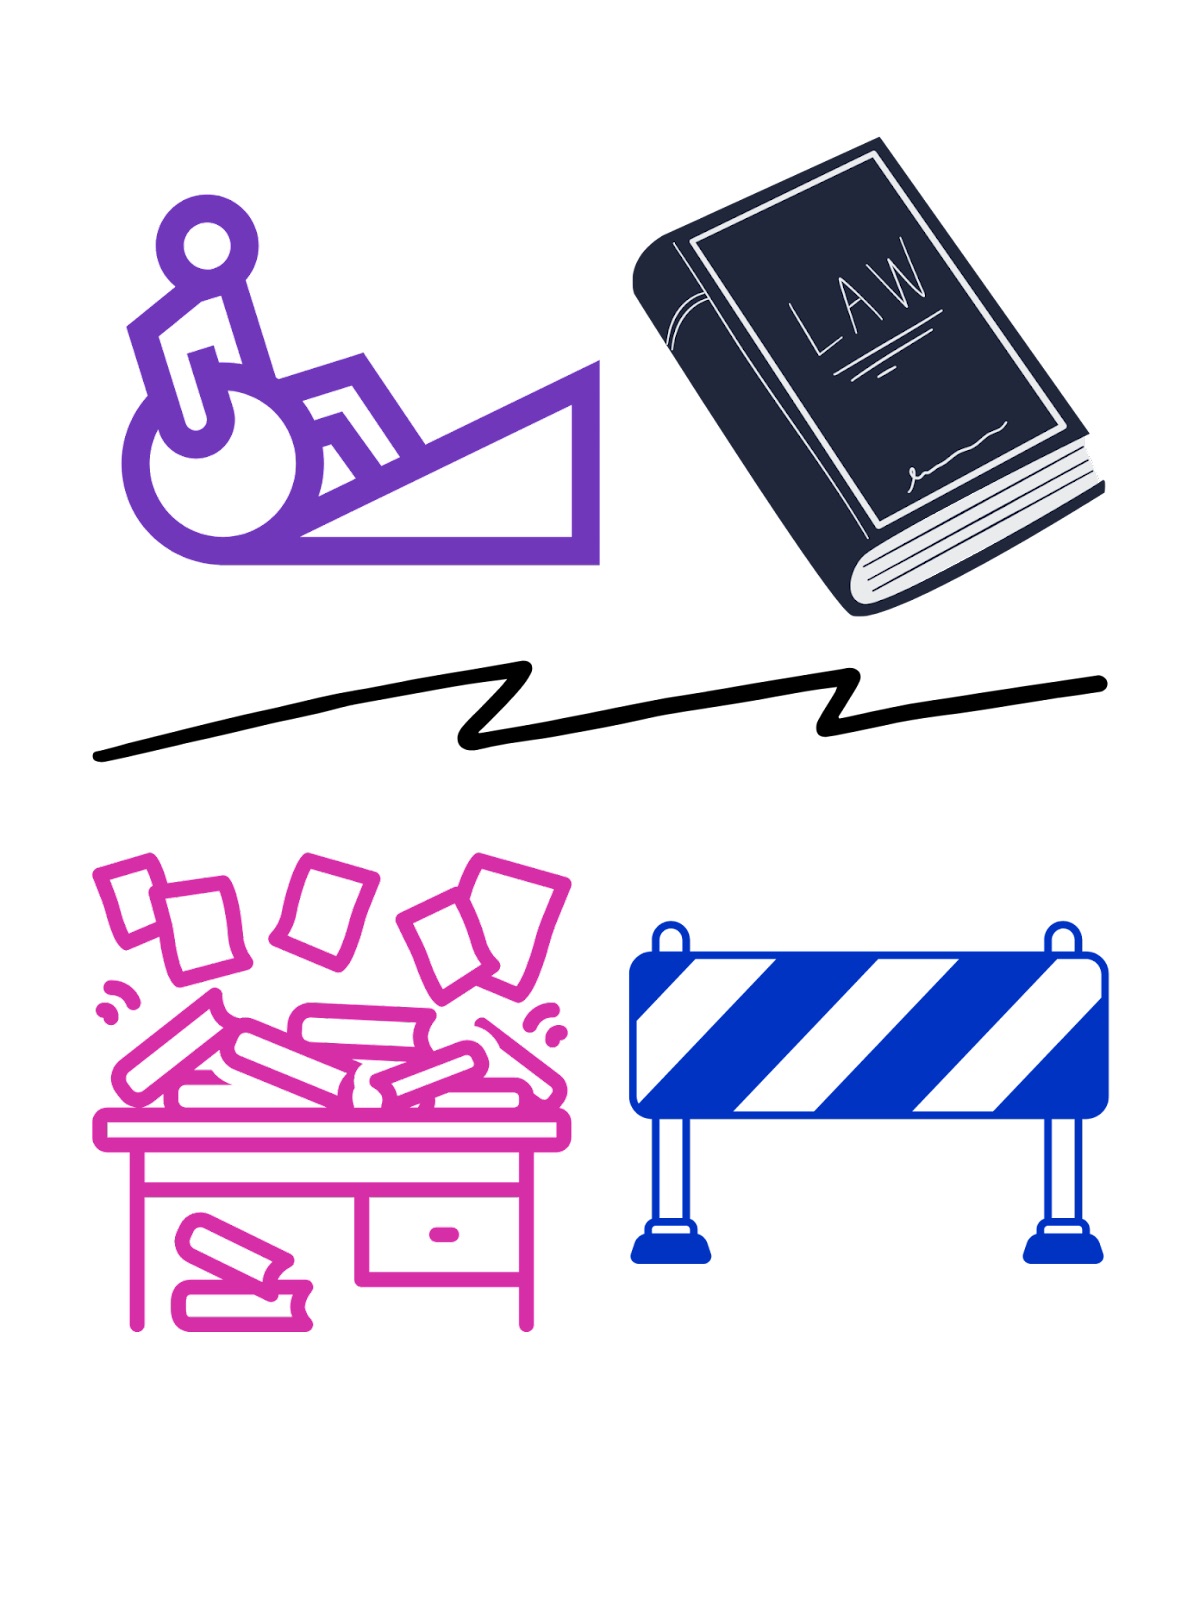  A series of four cartoons arranged with two on top of a black zig-zag line and two below. The top left cartoon shows a purple stick figure in a wheelchair ascending a ramp. The top right cartoon shows a navy blue book with white writing reading “Law.” The bottom left image shows a cluttered pink desk with books above and below, and papers flying up from the desk. The final image shows a light blue barrier with slanted white stripes.